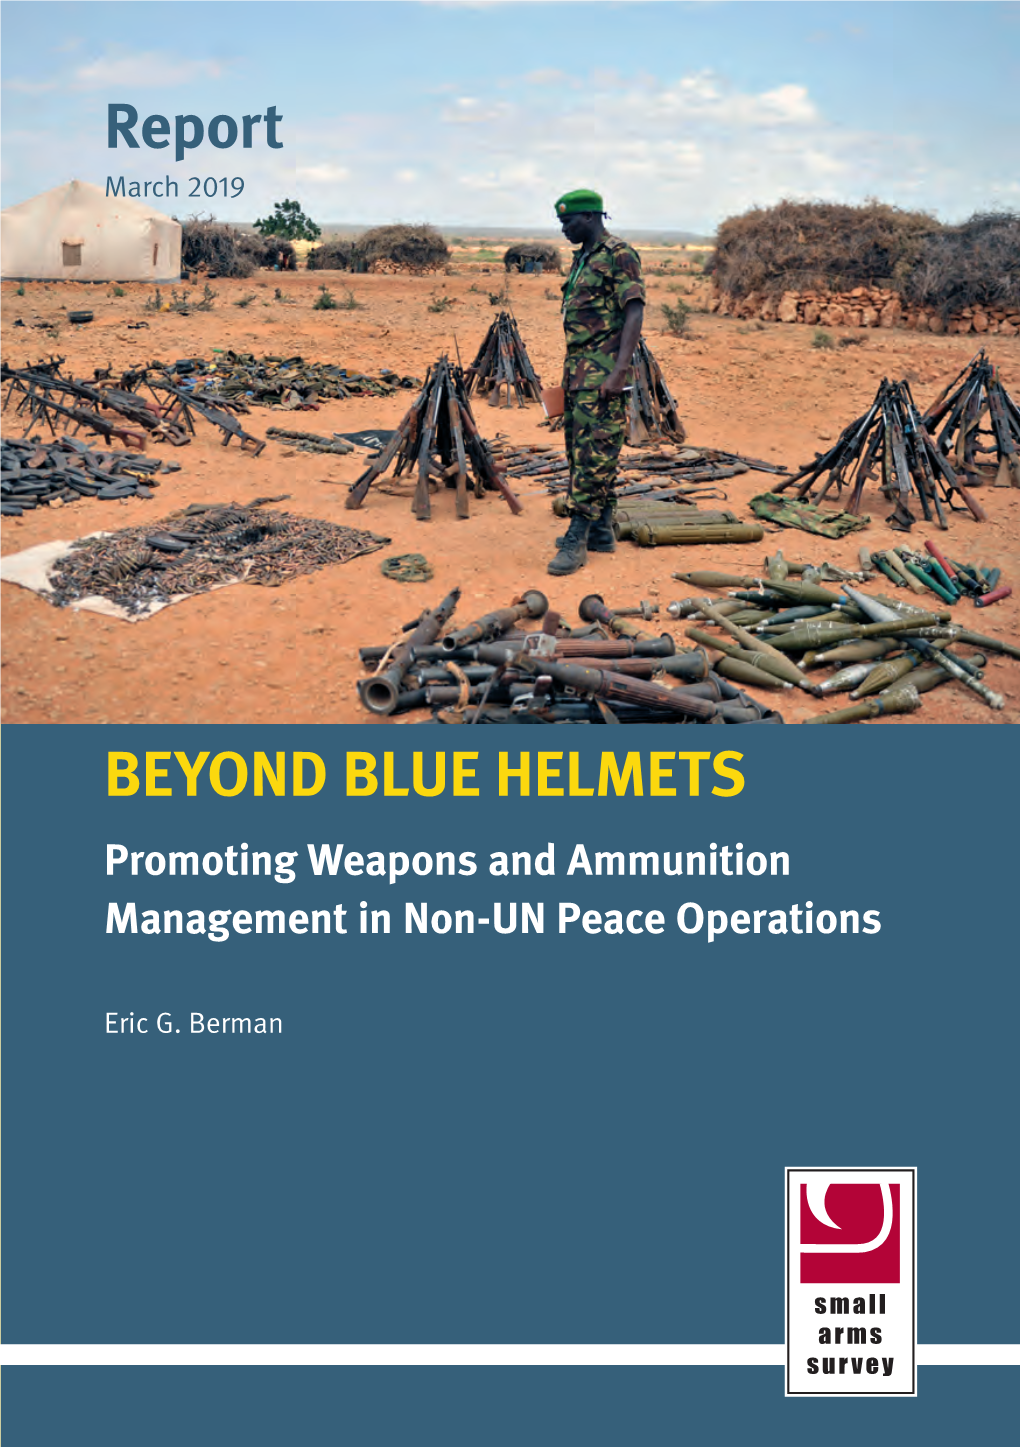 Beyond Blue Helmets: Promoting Weapons and Ammunition Management in Non-UN Peace Operations